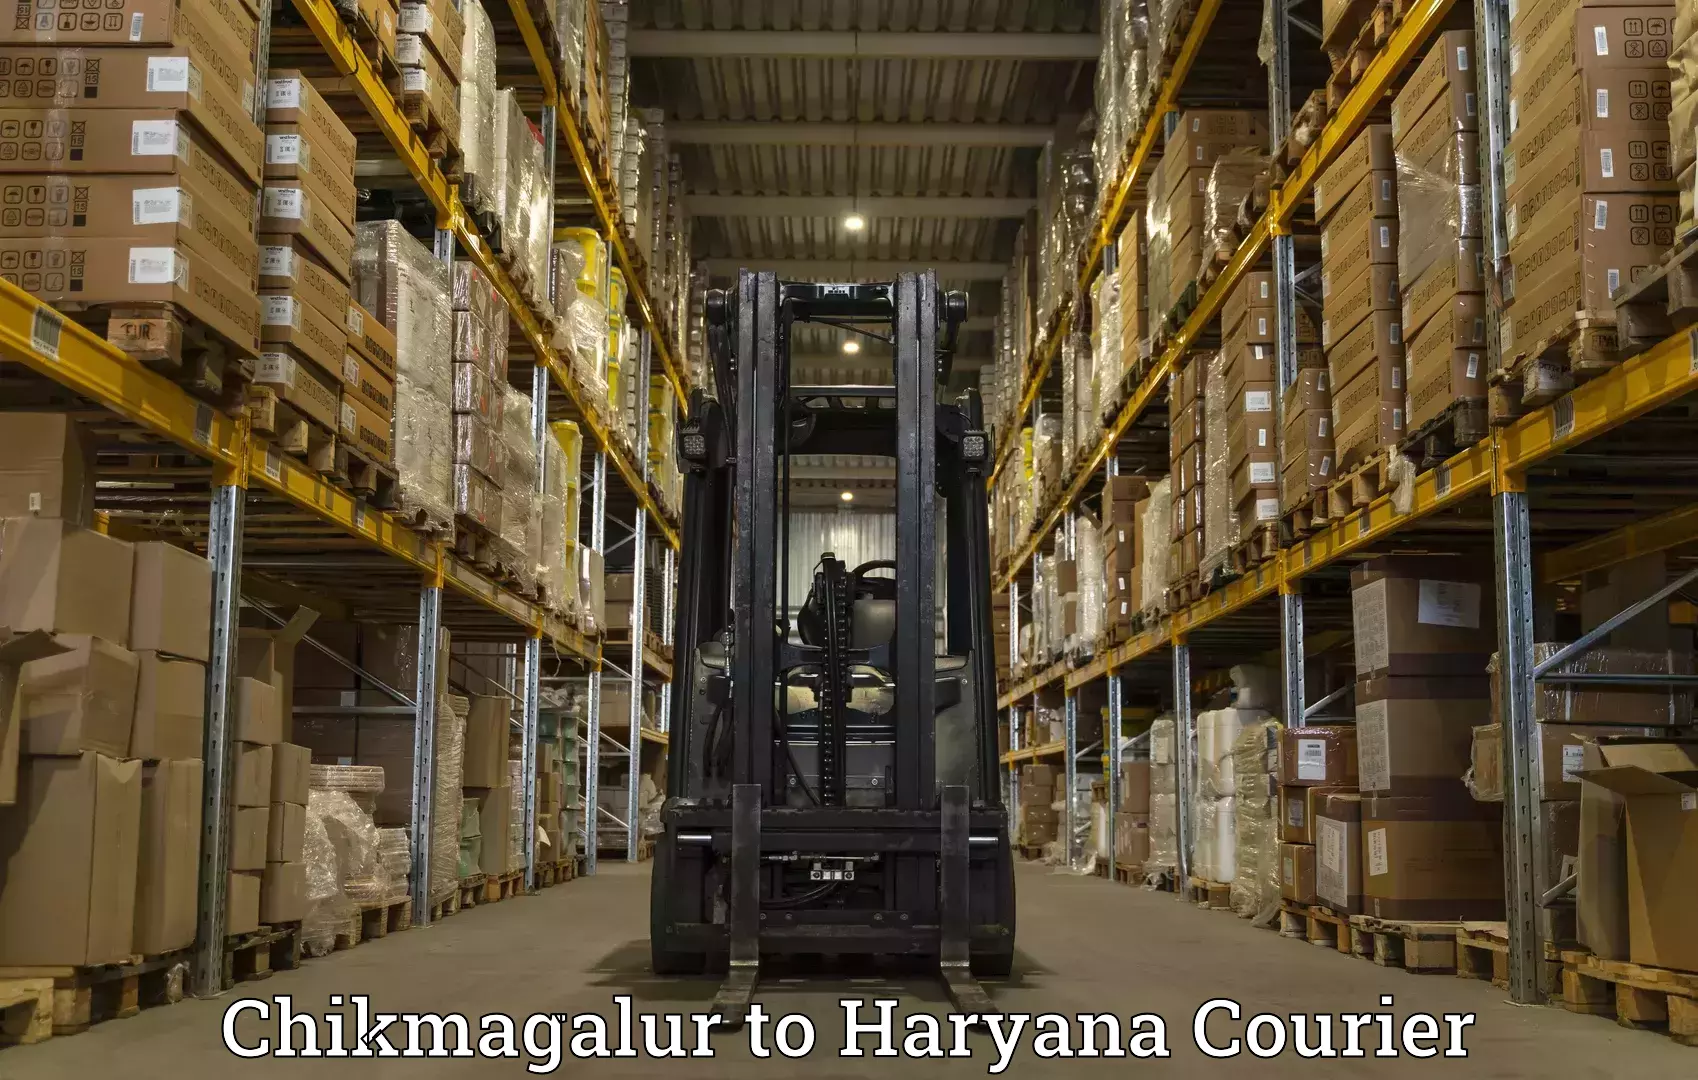 High-capacity shipping options Chikmagalur to NCR Haryana